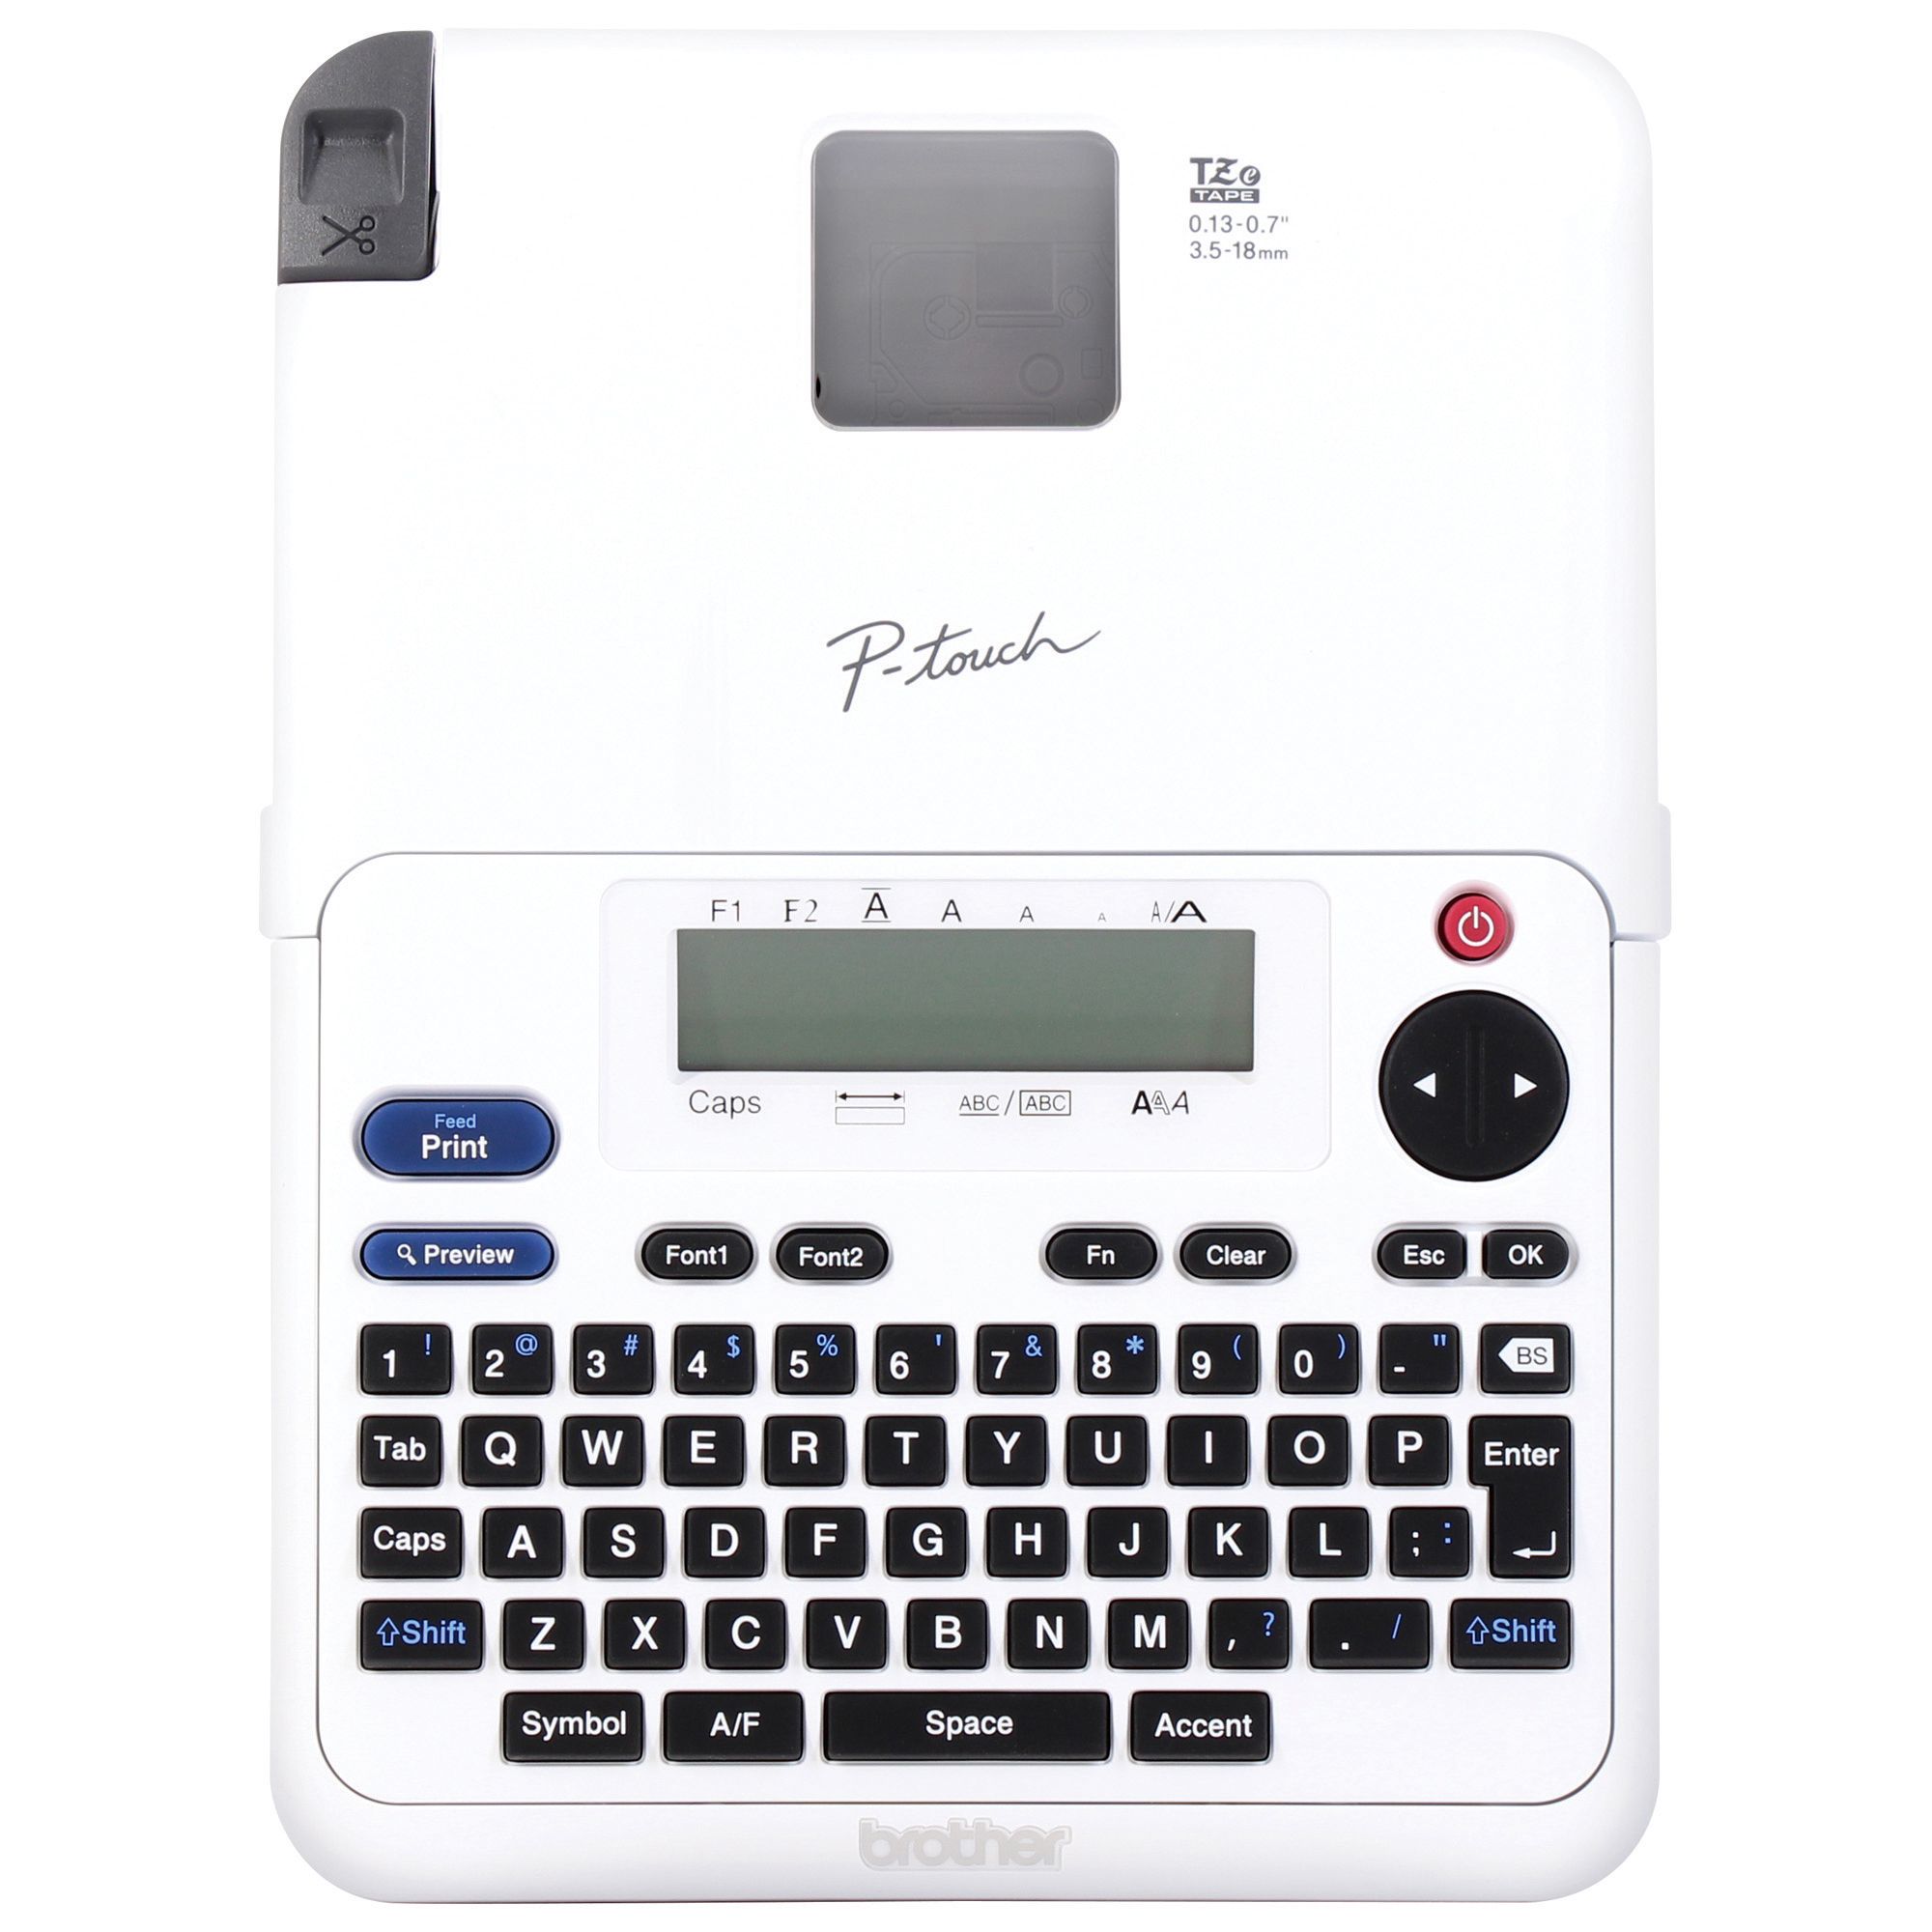 Brother P-touch Home &amp; Office Label Maker - BJs Wholesale